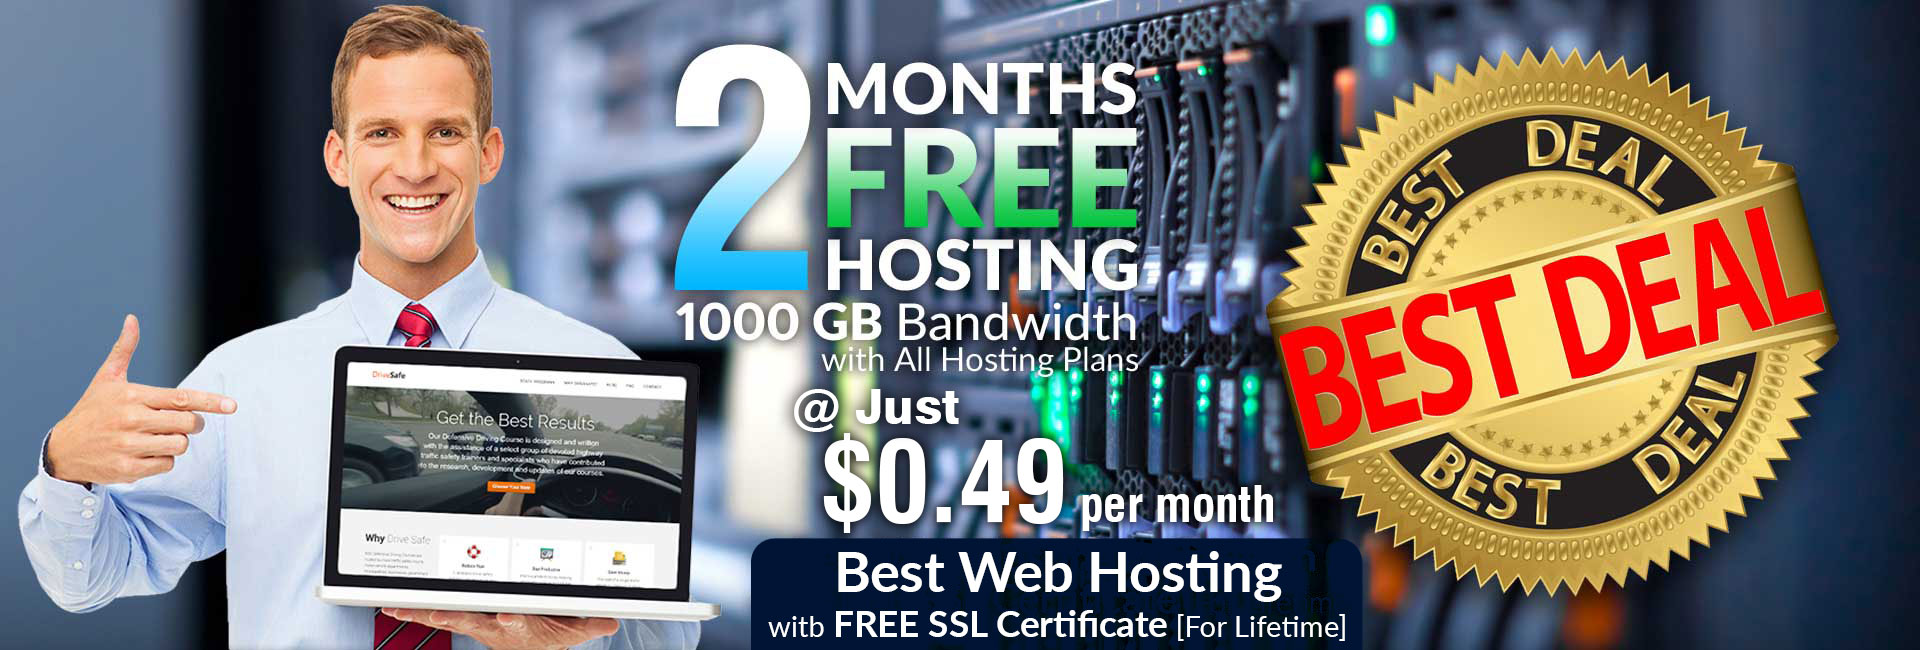 Cheap Web Hosting @ Just $0.49 / month, Best Quality Website Hosting with FREE Domain, FREE Web Hosting for 2 Months. High Speed UK Servers, Free SSL for all Domains, Free Site Building Tools. Unlimited Hosted Domains, Unlimited Email Accounts, Unlimited Databases, Unlimited Subdomains, Unlimited Parked Domains.